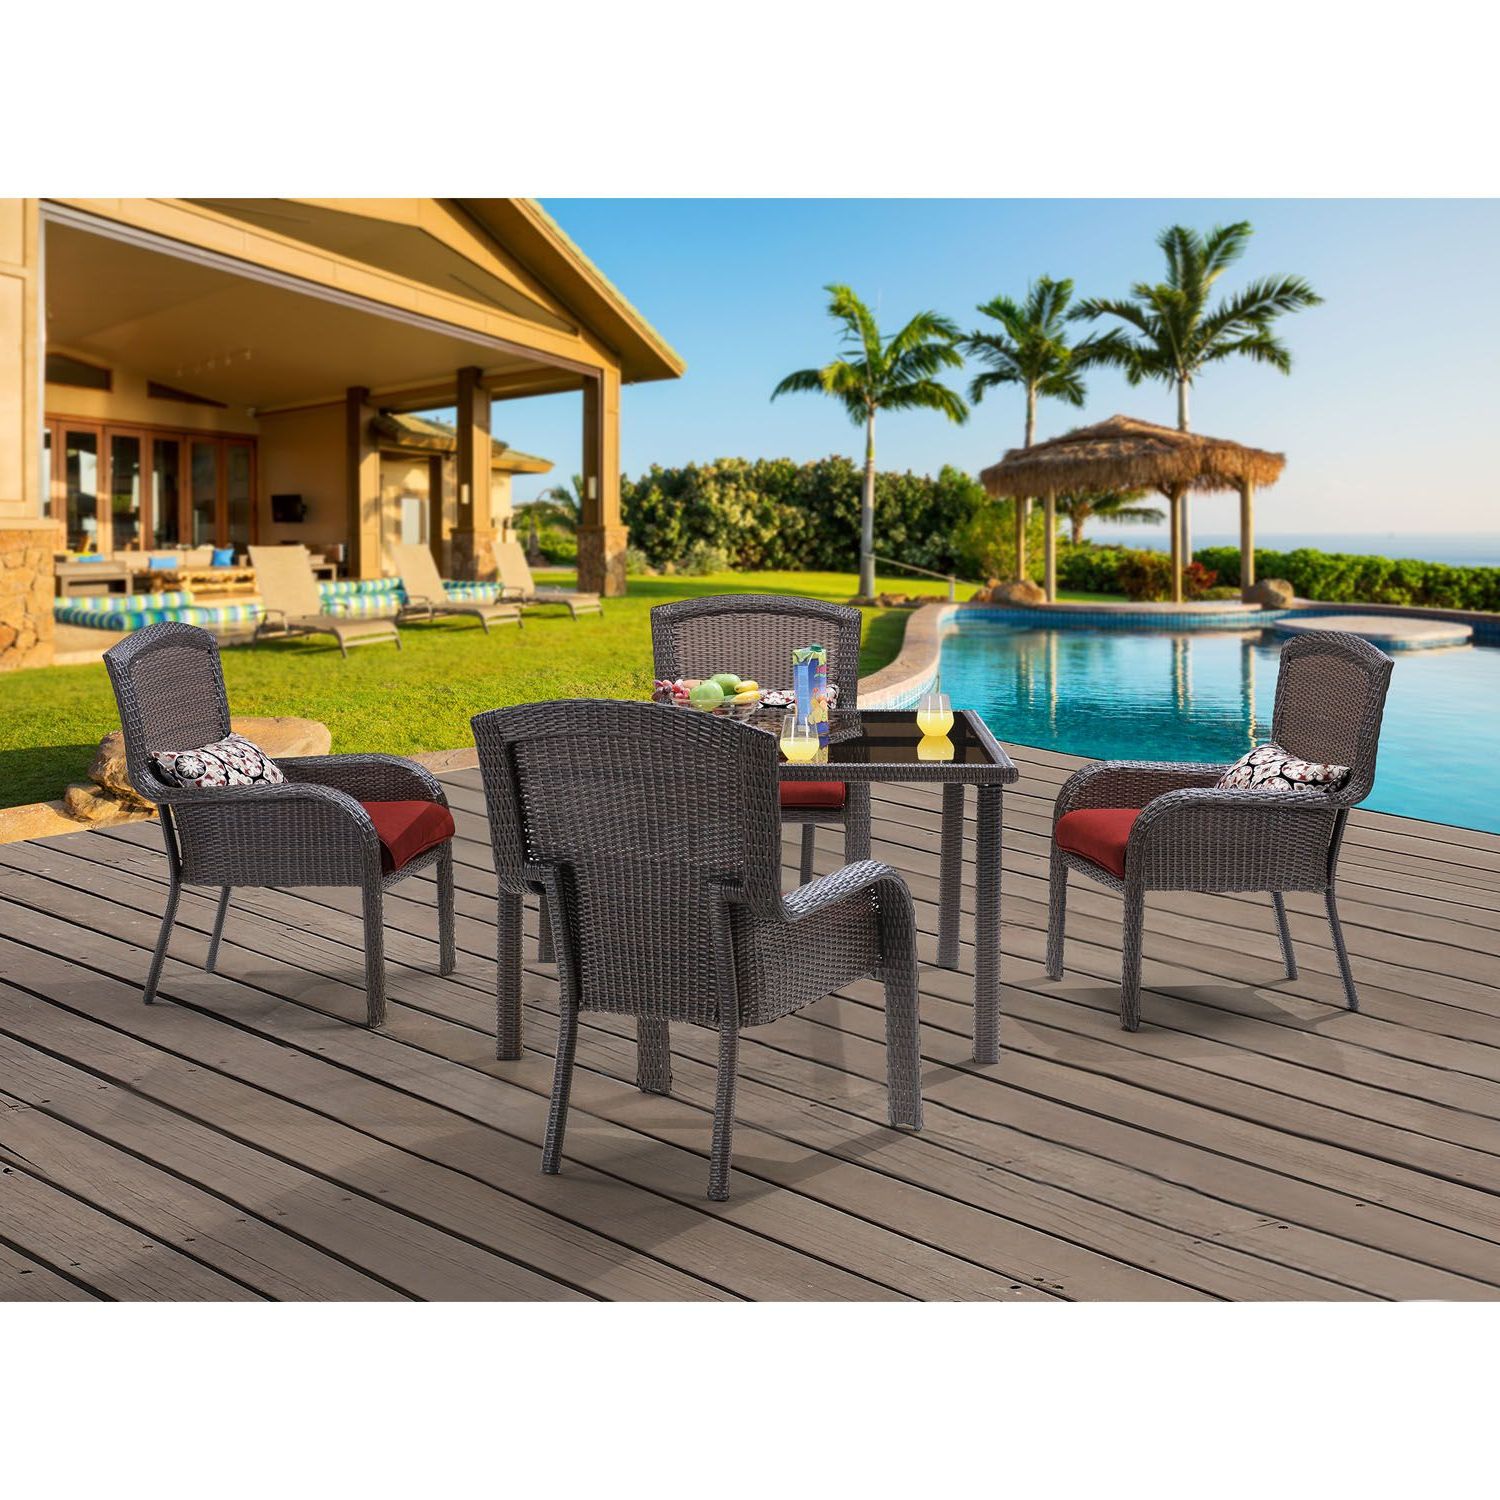 5 Piece Dining Set Throughout Well Known Red 5 Piece Outdoor Dining Sets (View 14 of 15)